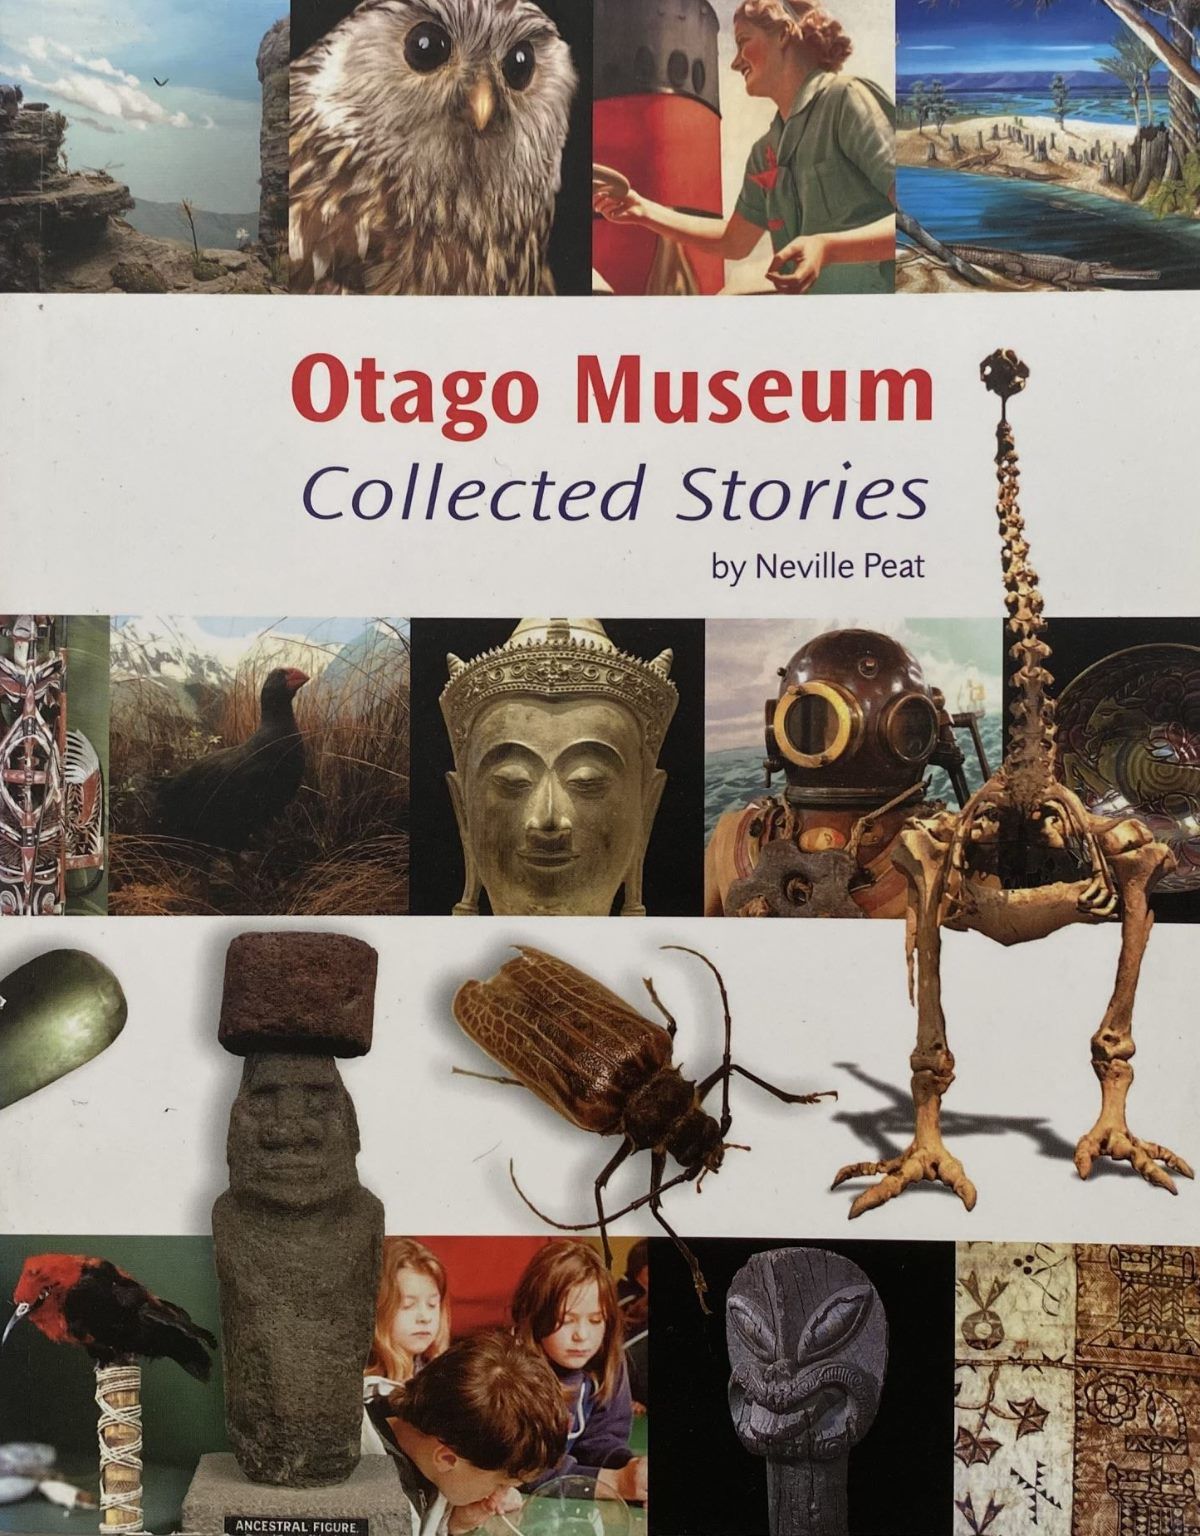 Otago Museum - Collected Stories